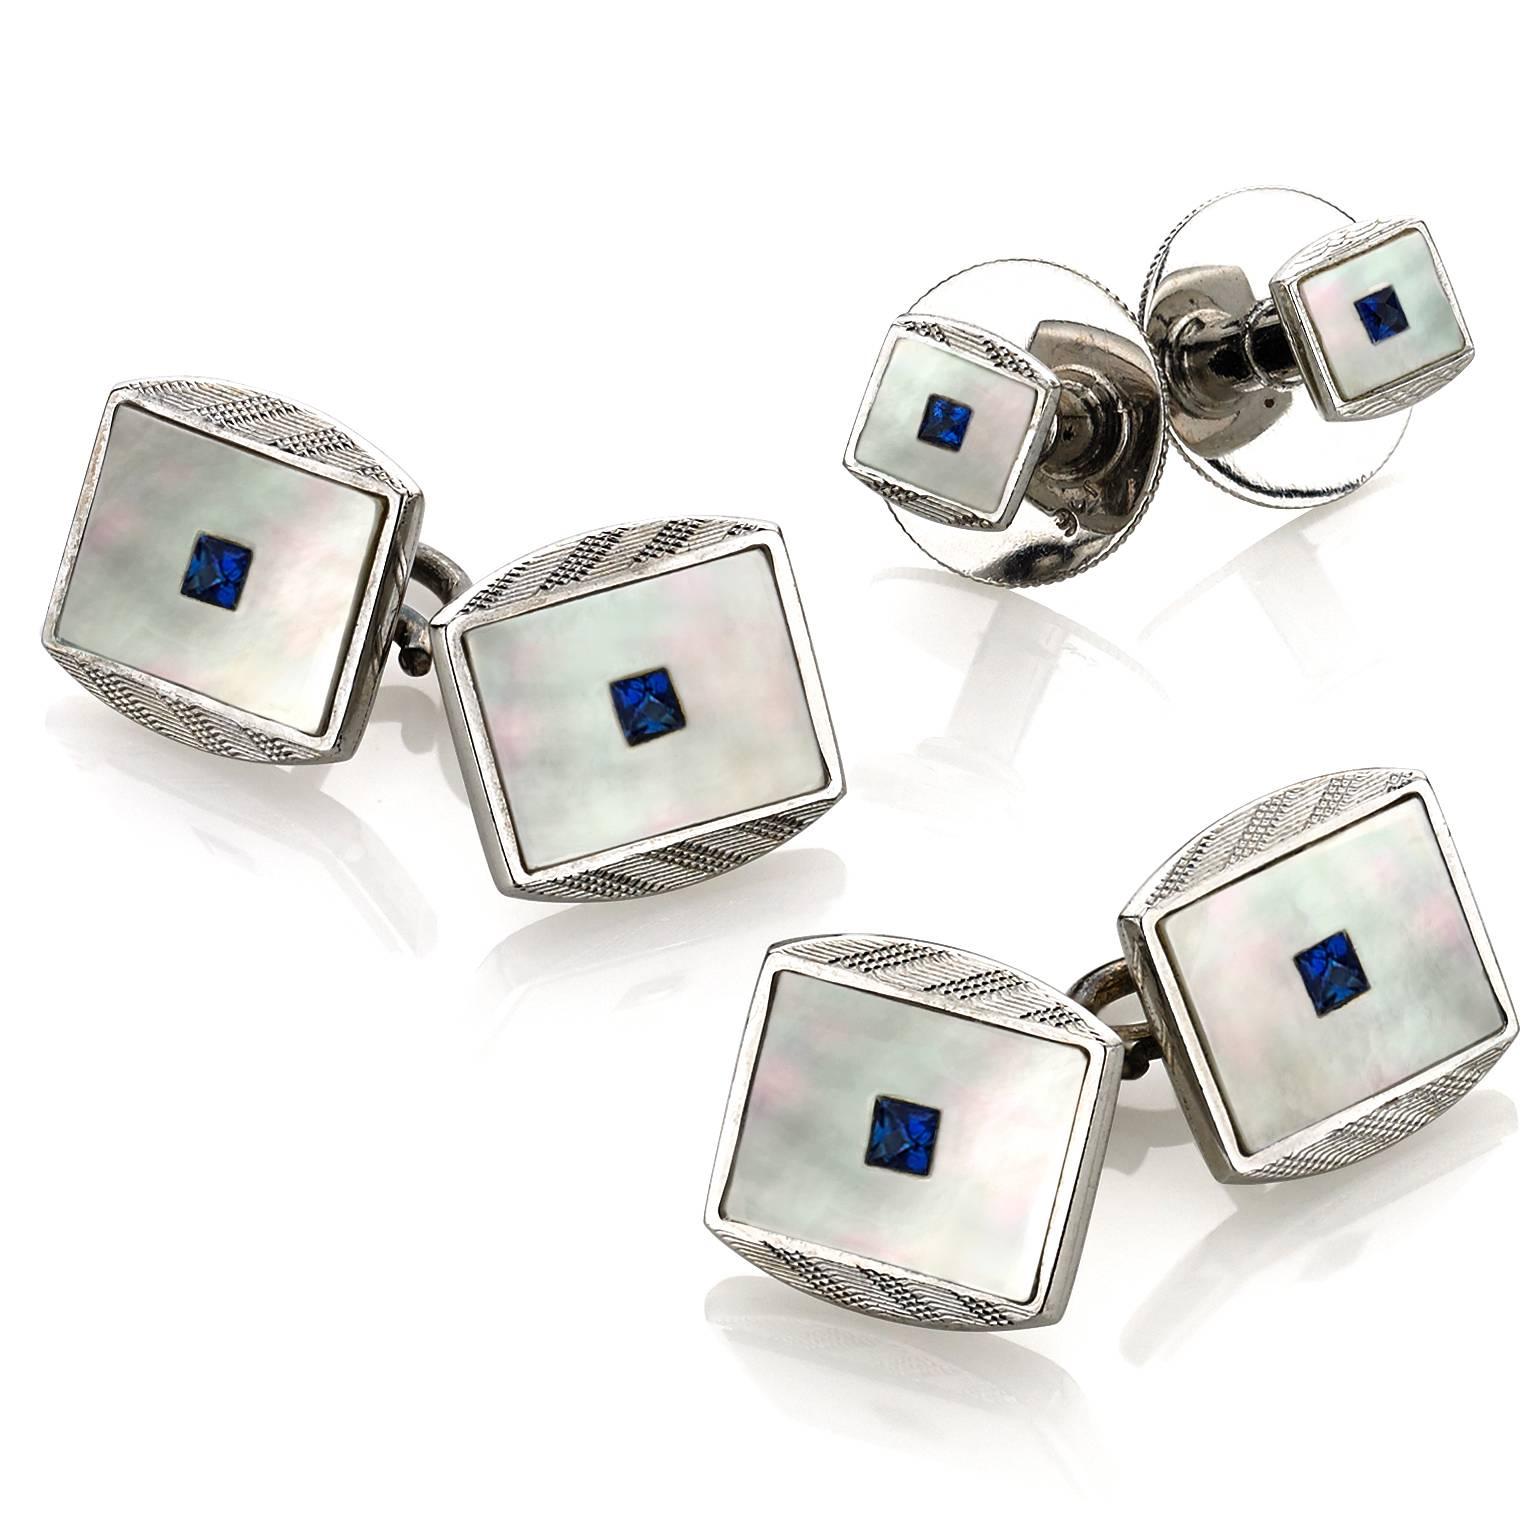 British Dress Set (cuff links and stud set) in 9k white gold with princess-cut blue sapphire and mother-of-pearl, circa 1915. 

Four Screw-Back Button Studs
Two Double-Sided Cuff Links